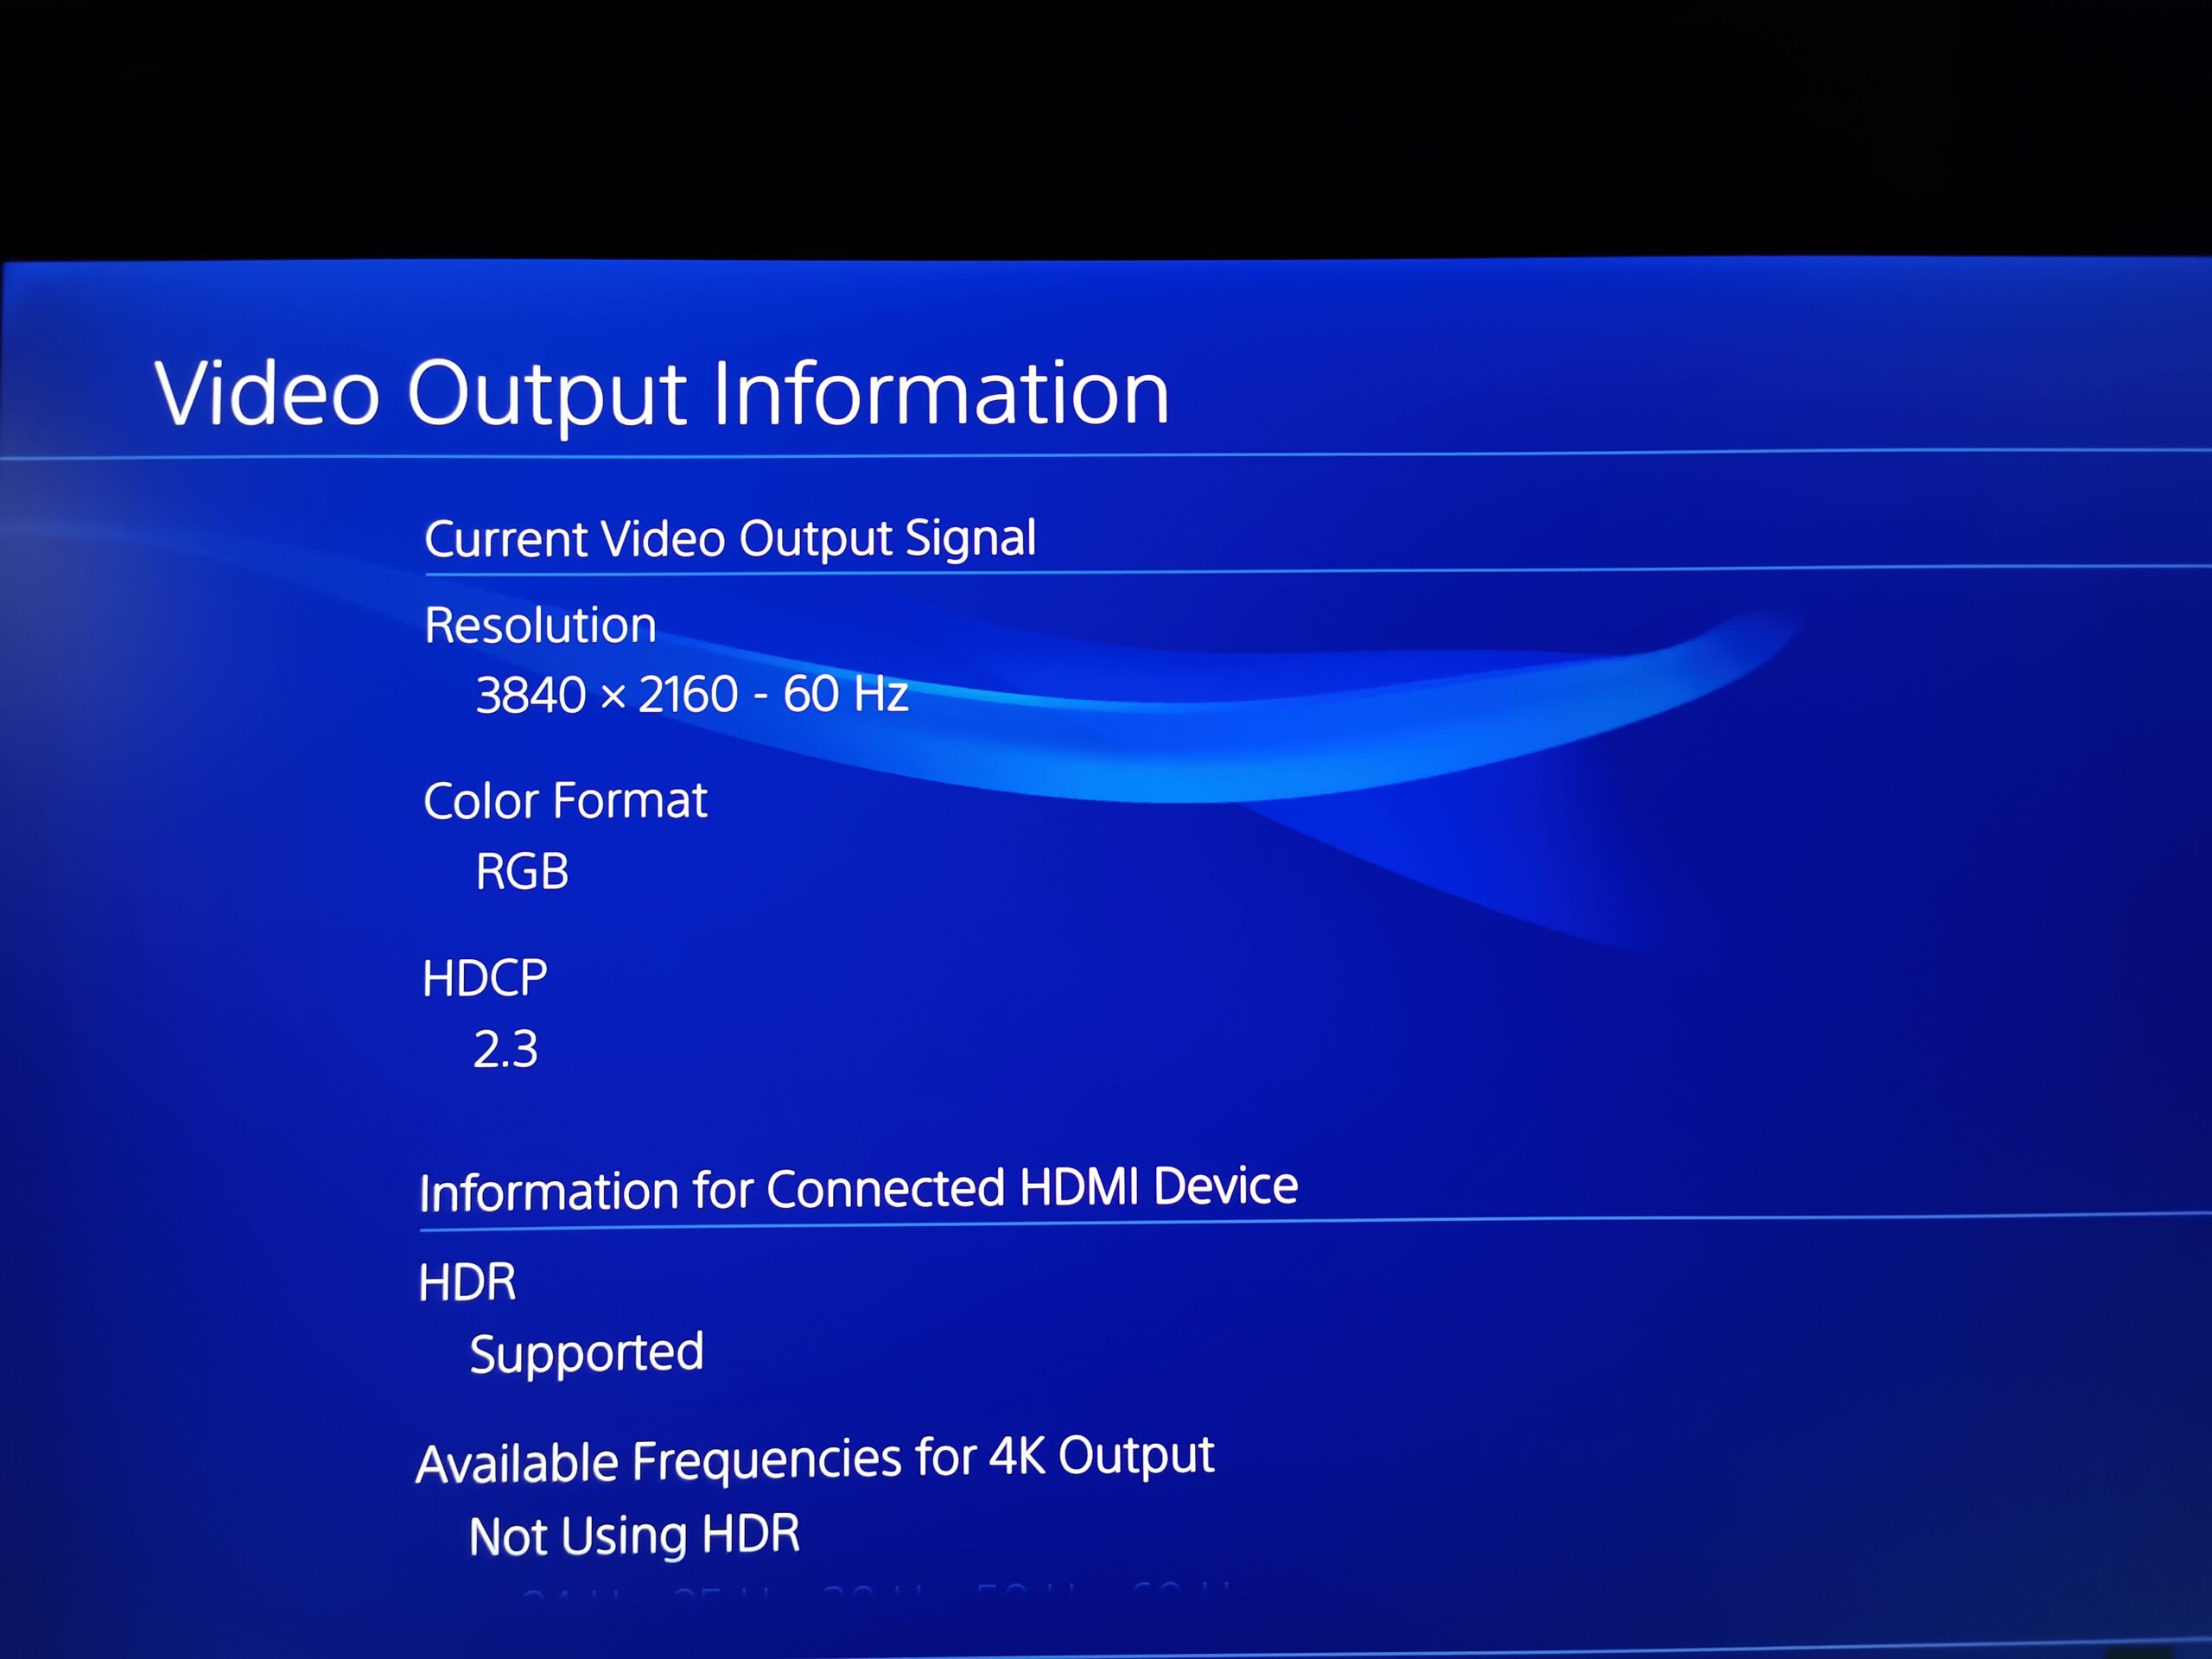 latest ps4 firmware version